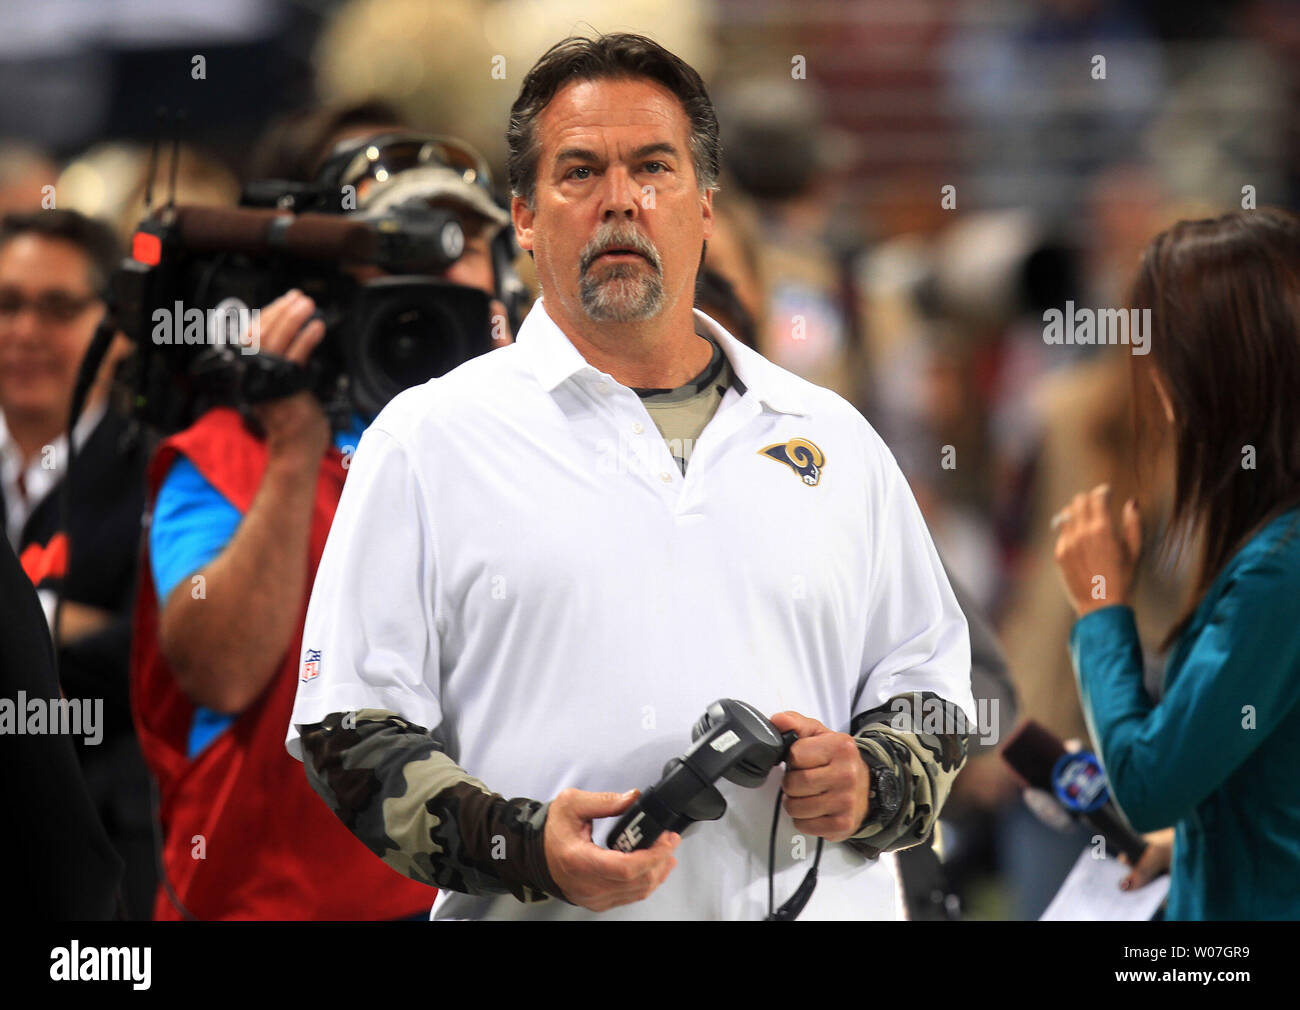 St. Louis Rams head coach Jeff Fisher waits for the start of the game against the Denver Broncos at the Edward Jones Dome in St. Louis on November 16, 2014. UPI/Bill Greenblatt Stock Photo